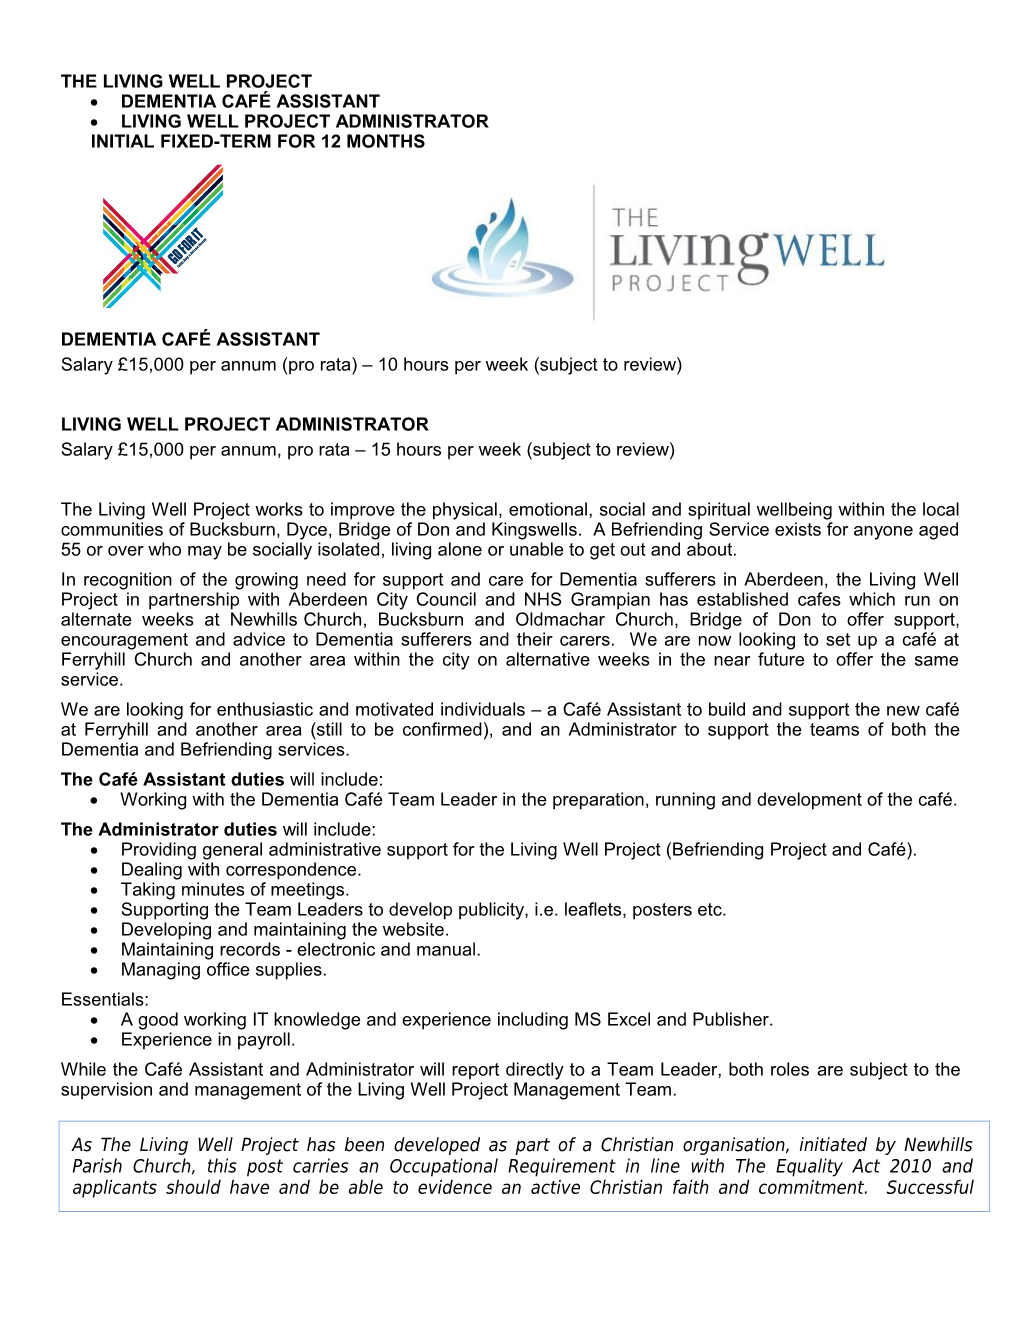 The Living Well Project